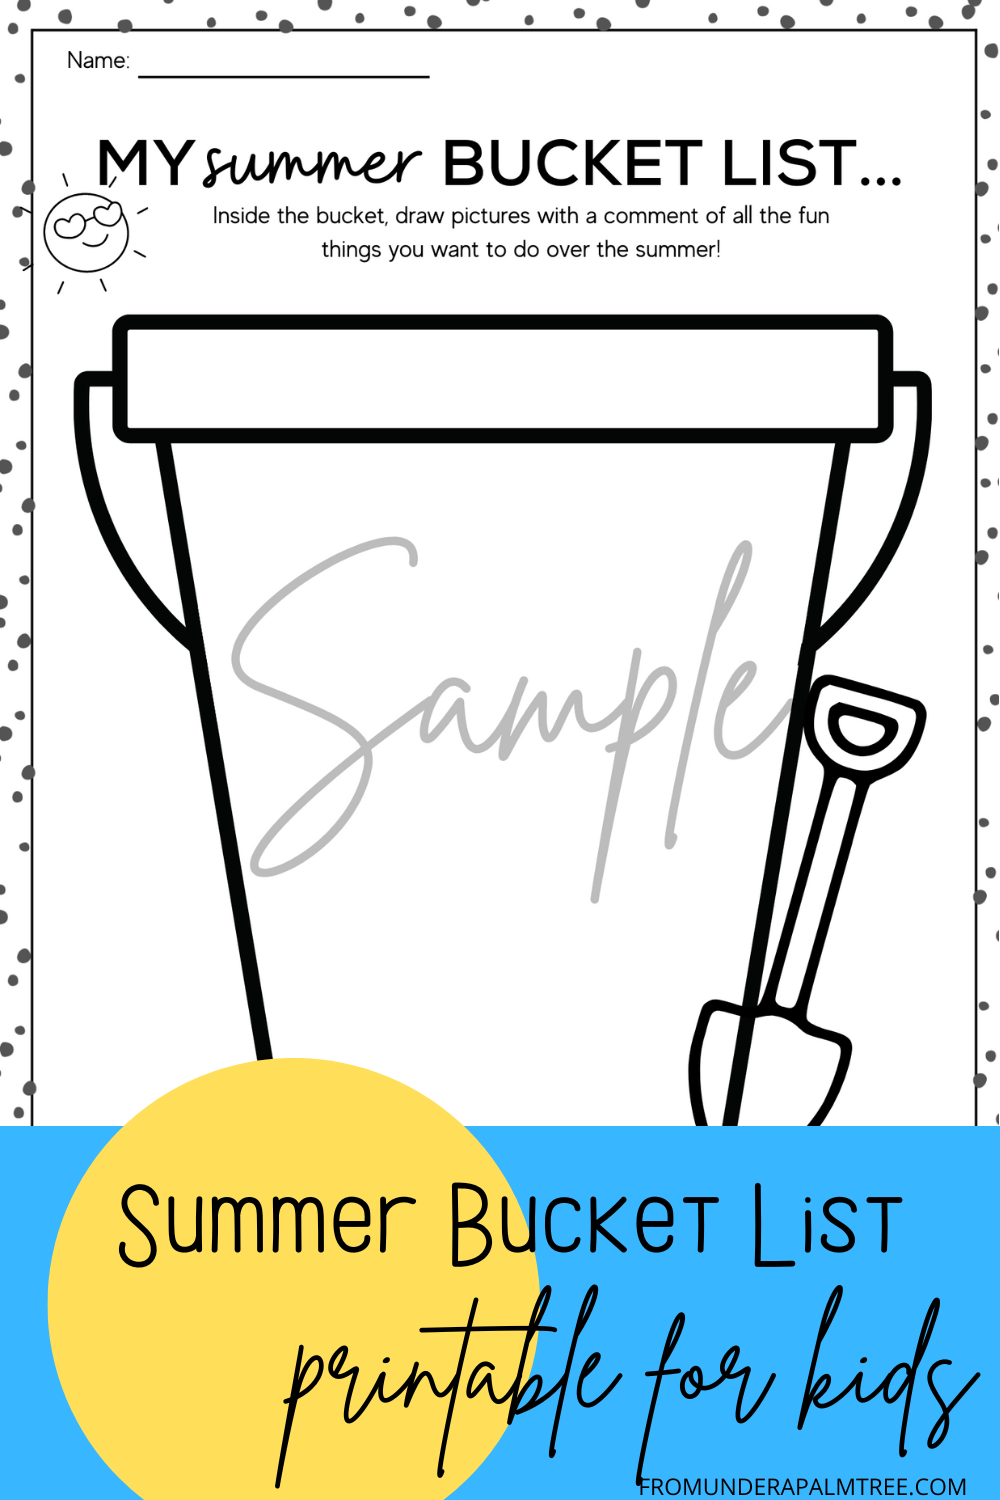 Summer Bucket list | teacher farewell letter | Faorite stuff I learned this year | End of school year worksheets | end of school year | end of the year worksheet bundle | first grade worksheets | second grade worksheets | guided writing worksheets | What did I learn this year worksheet | My favorite things about this year | kids printables | kid school worksheets | end of the year activity | schools out activity | kids graduation activity | first grade gradutation activity | letter to my teacher | letter to my teacher worksheet |